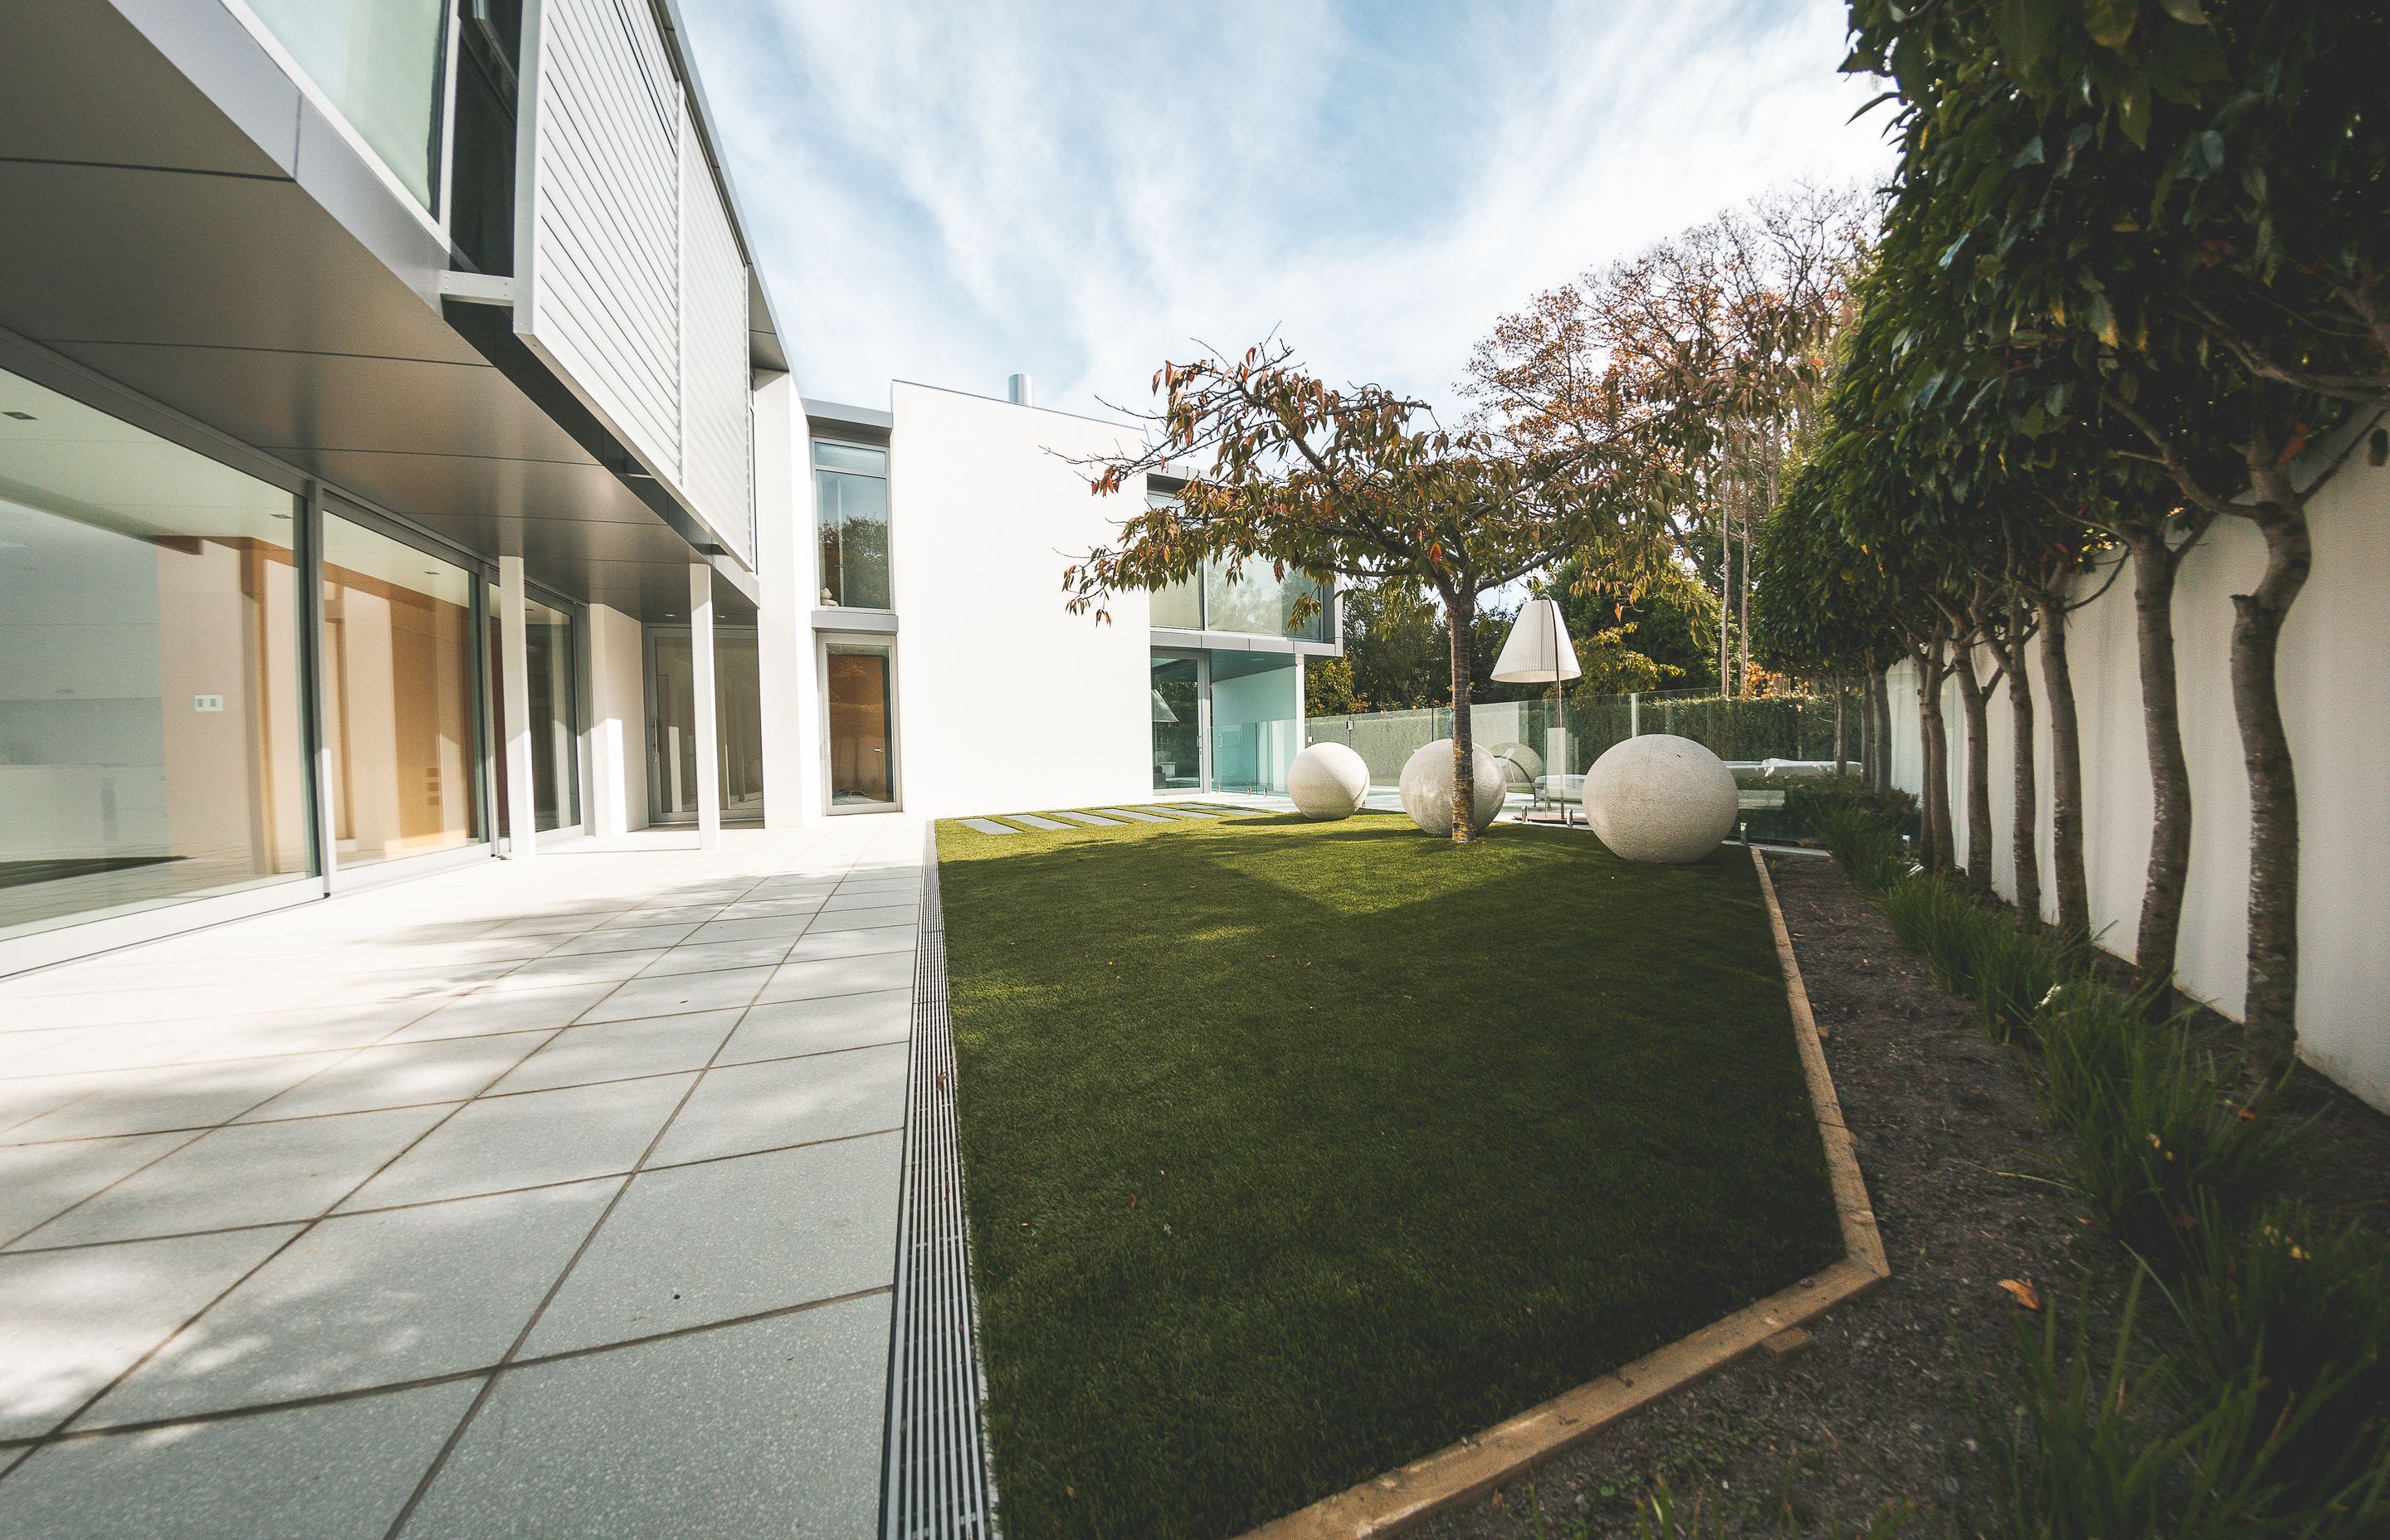 SmartGrass installed 130sqm of Oasis 35 in three different areas of the garden to create a series of dog-friendly, low-maintenance lawn areas.